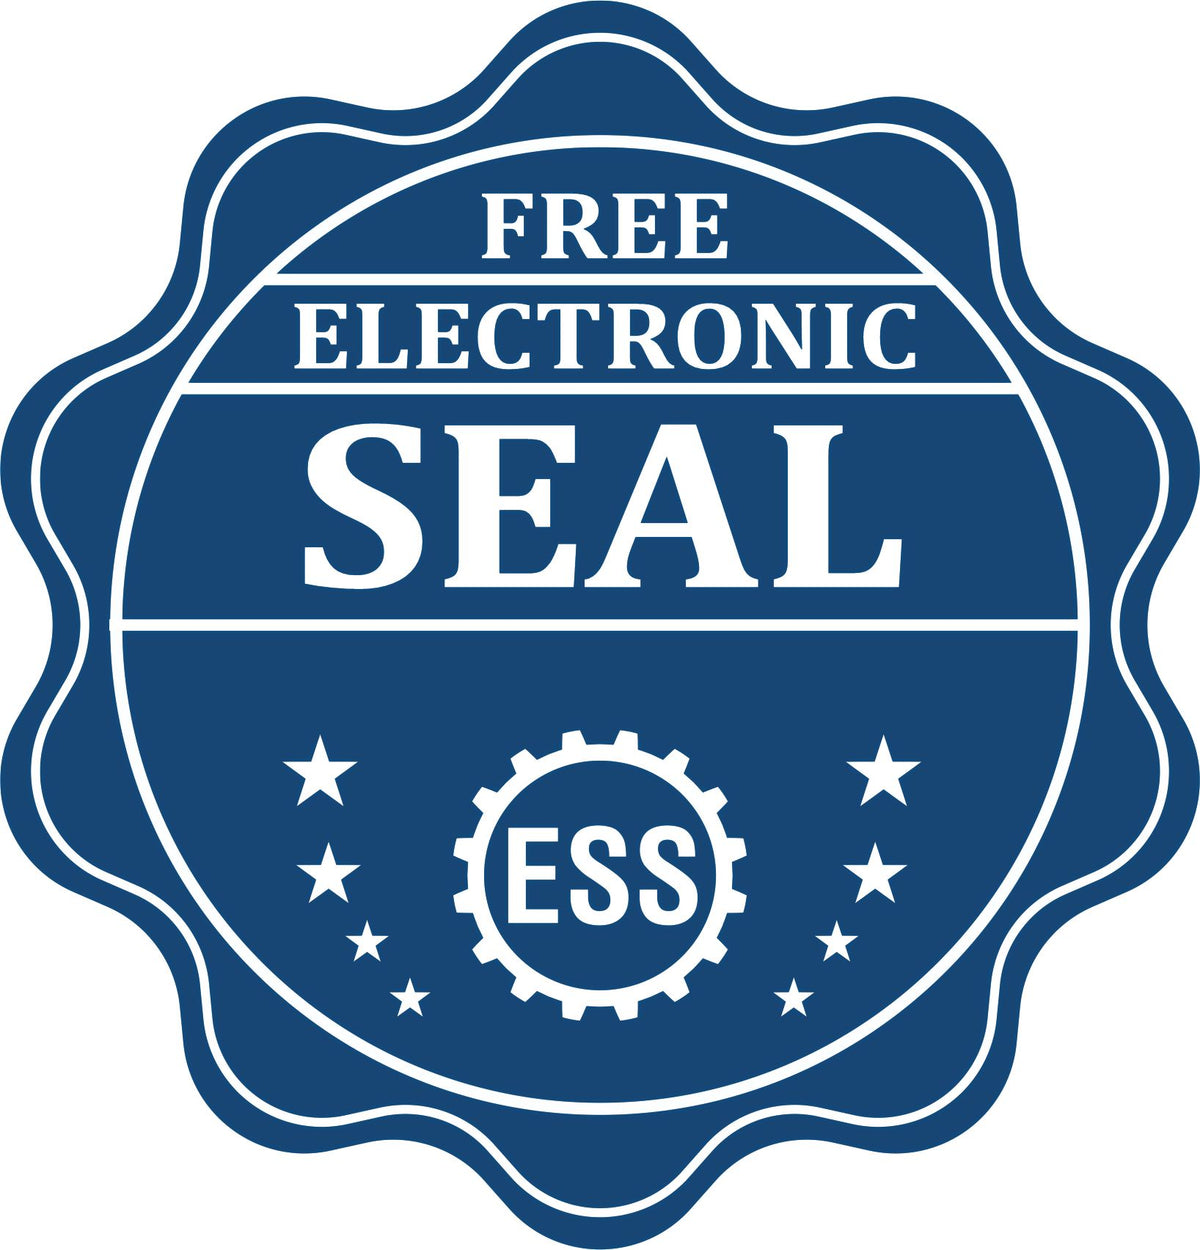 A badge showing a free electronic seal for the West Virginia Engineer Desk Seal with stars and the ESS gear on the emblem.